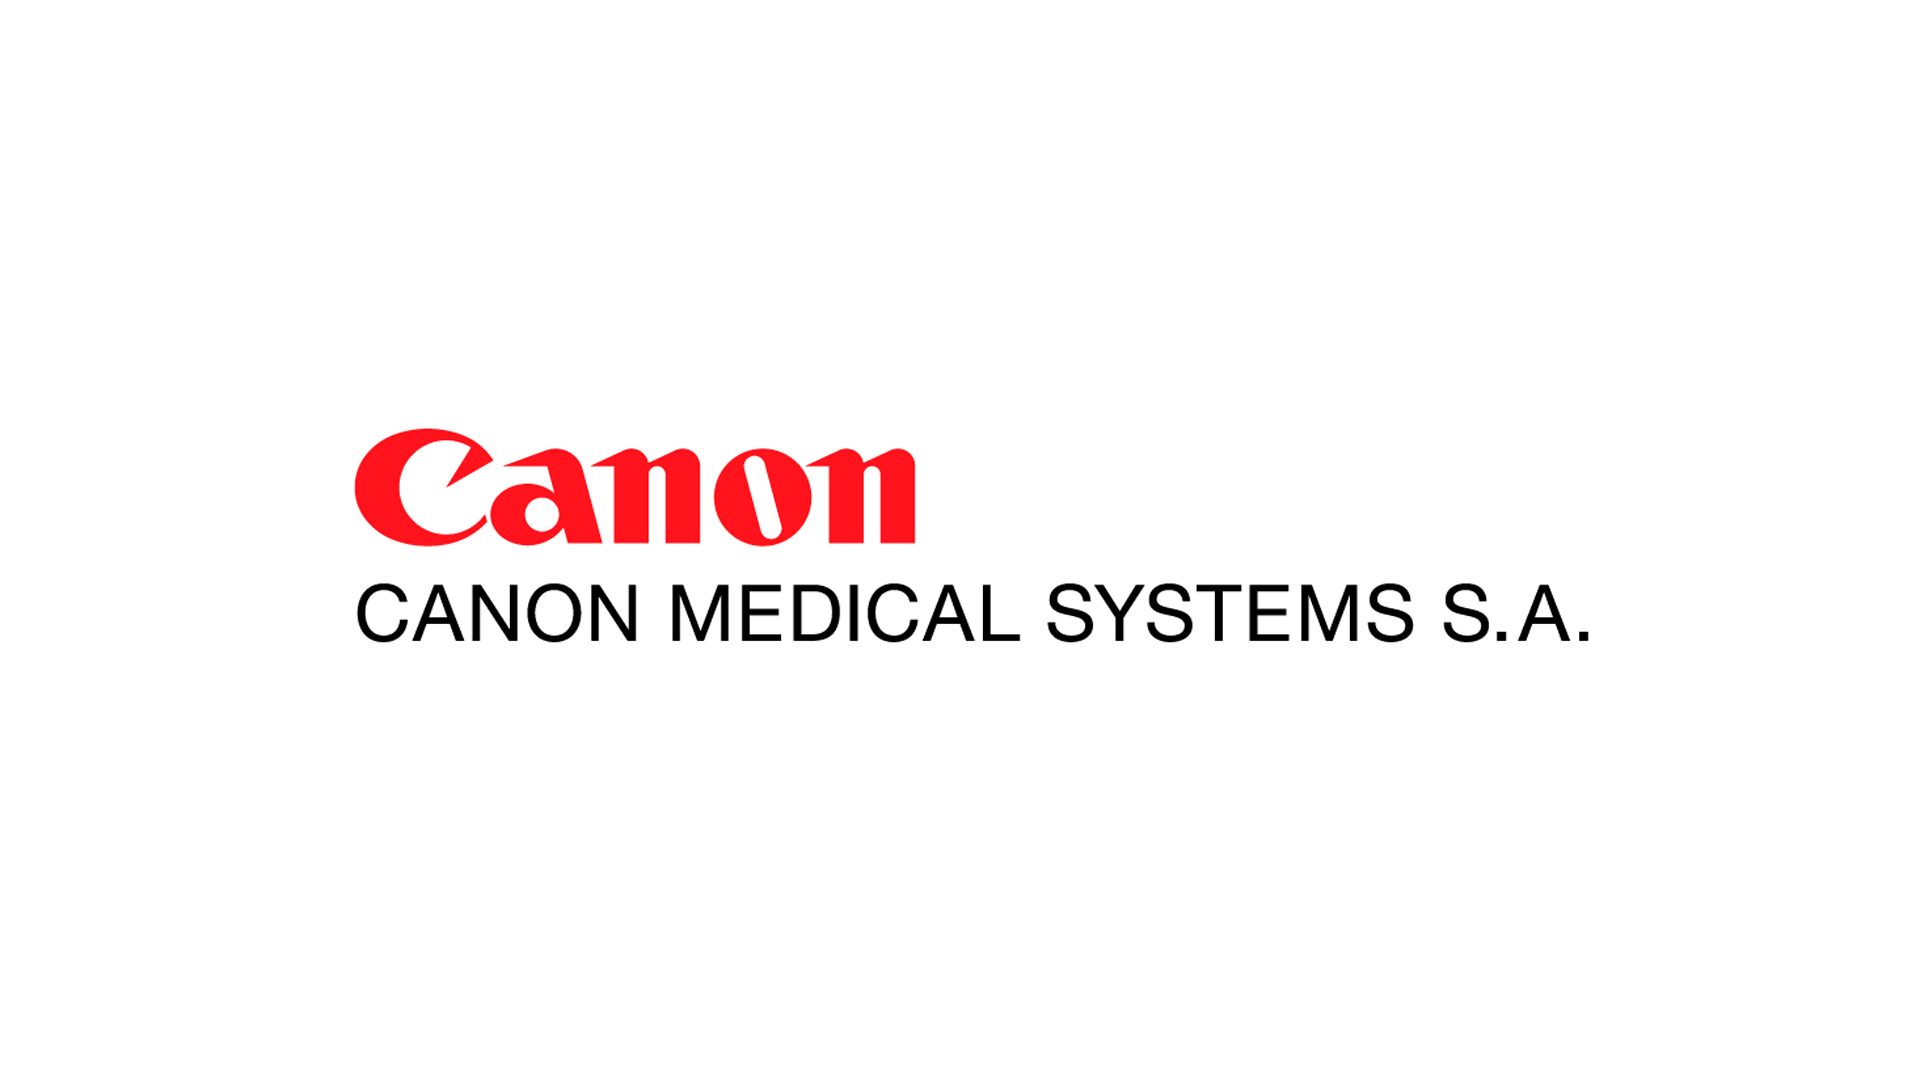 Canon Medical Systems Iberia, new global Innovation partner